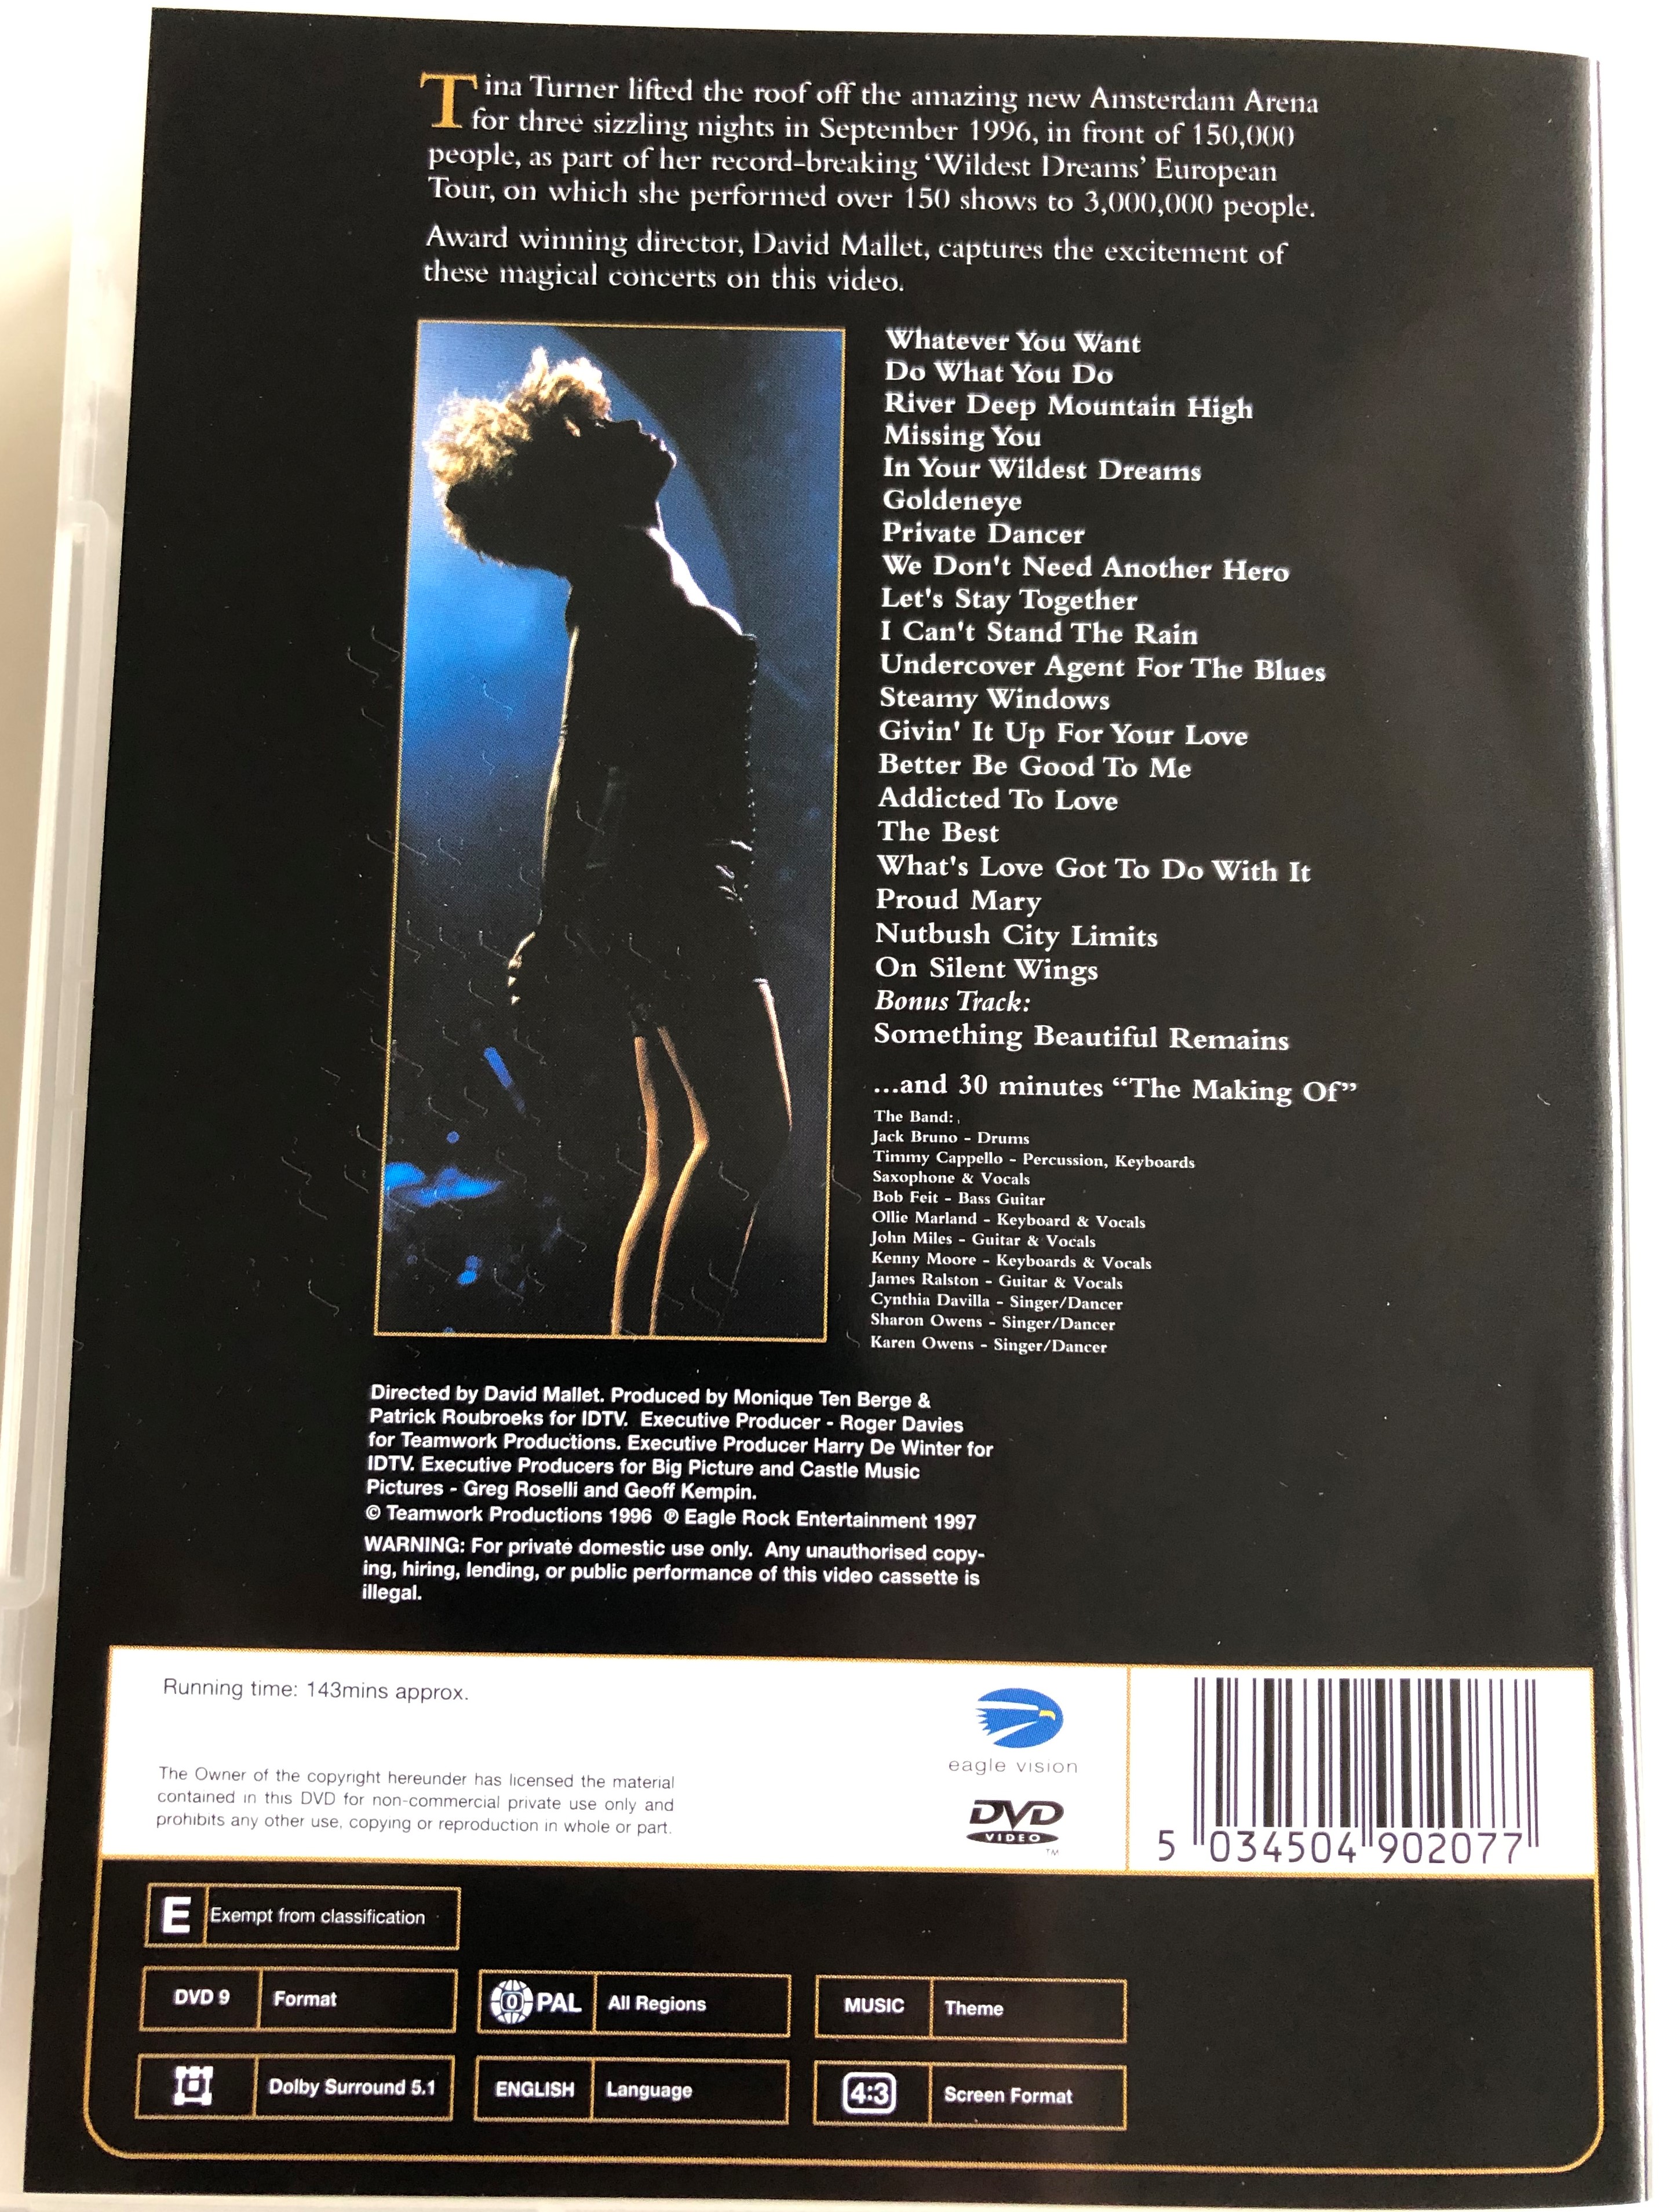 tina-turner-live-in-amsterdam-dvd-wildest-dreams-tour-directed-by-david-mallet-3.jpg